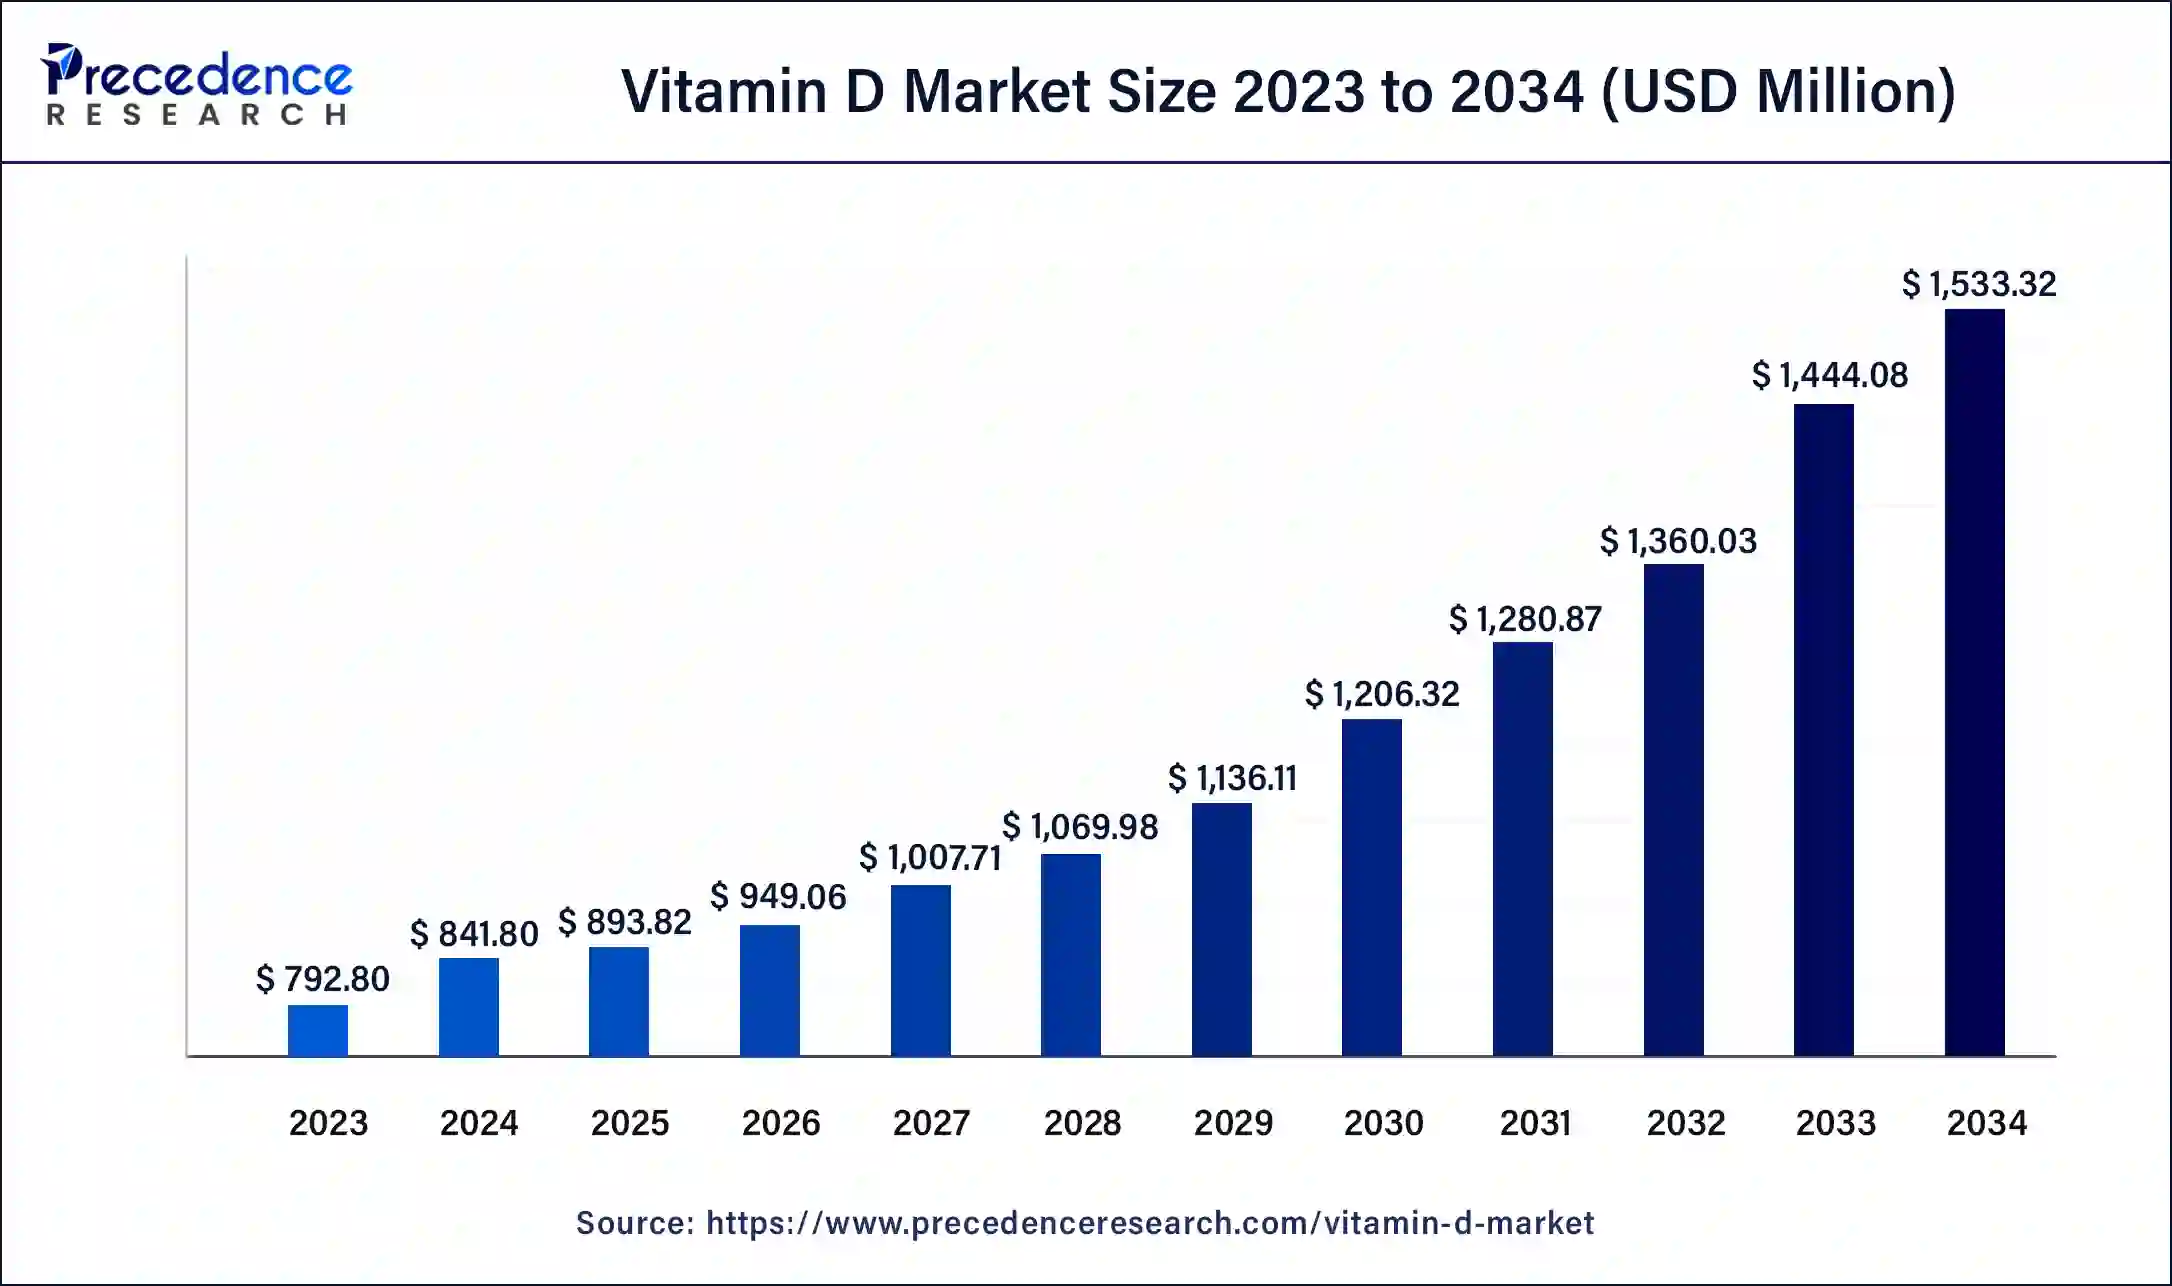 Vitamin D Market Size 2024 to 2034